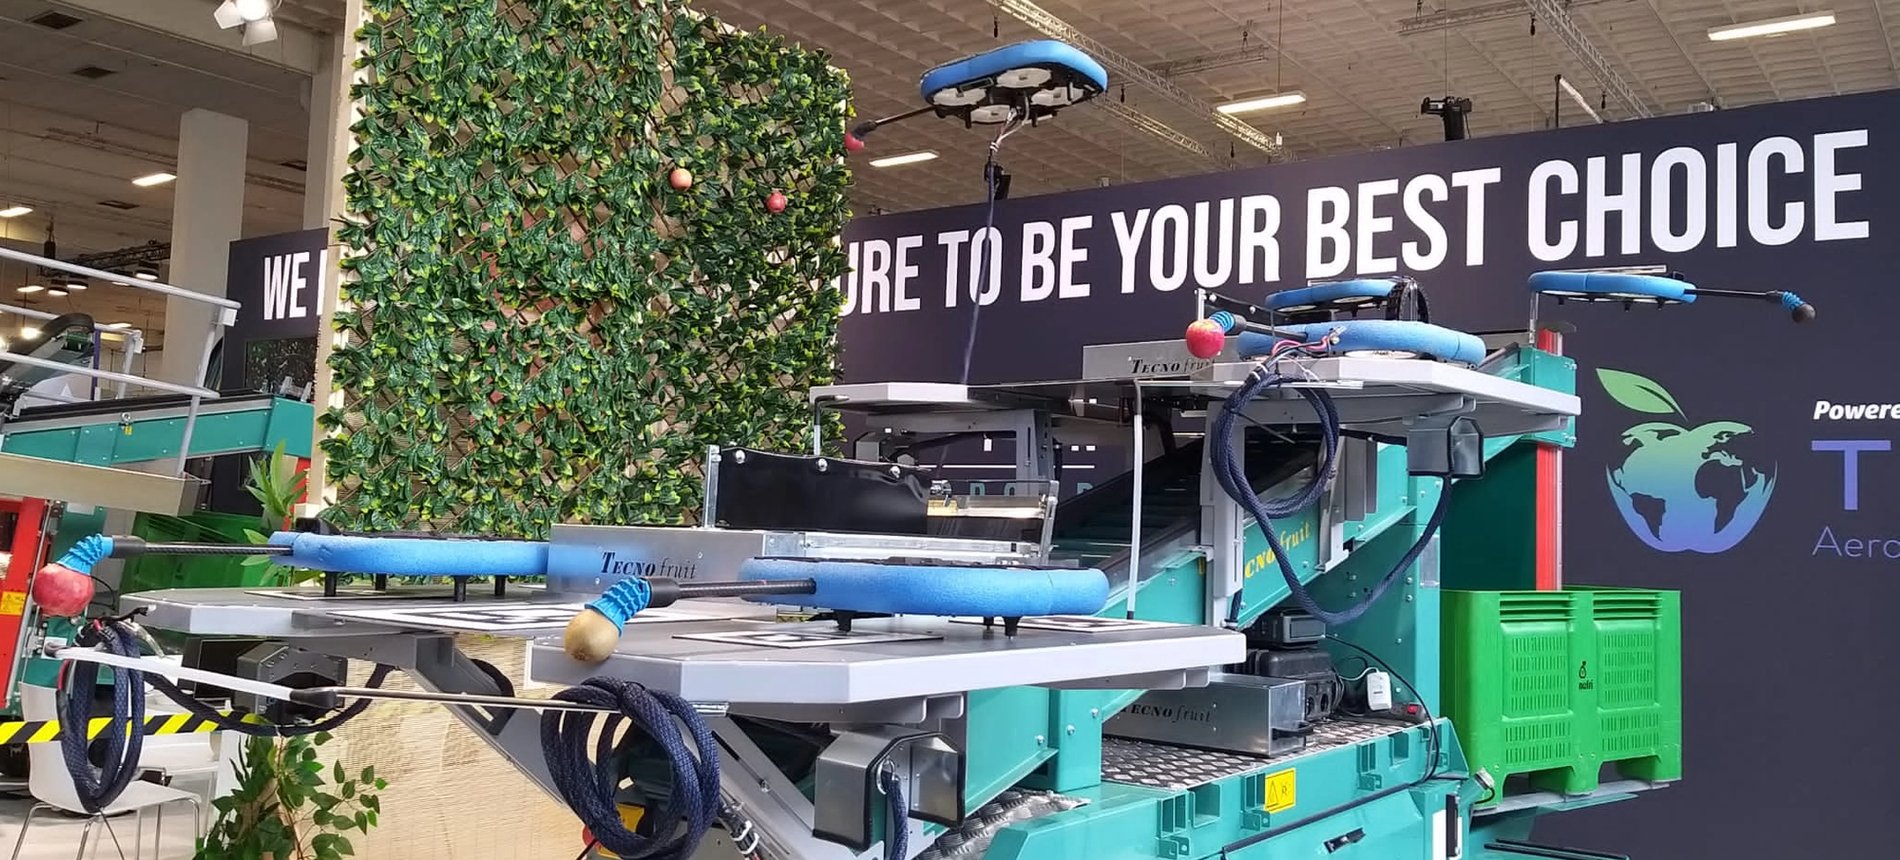 World's First Fully Automated Harvester